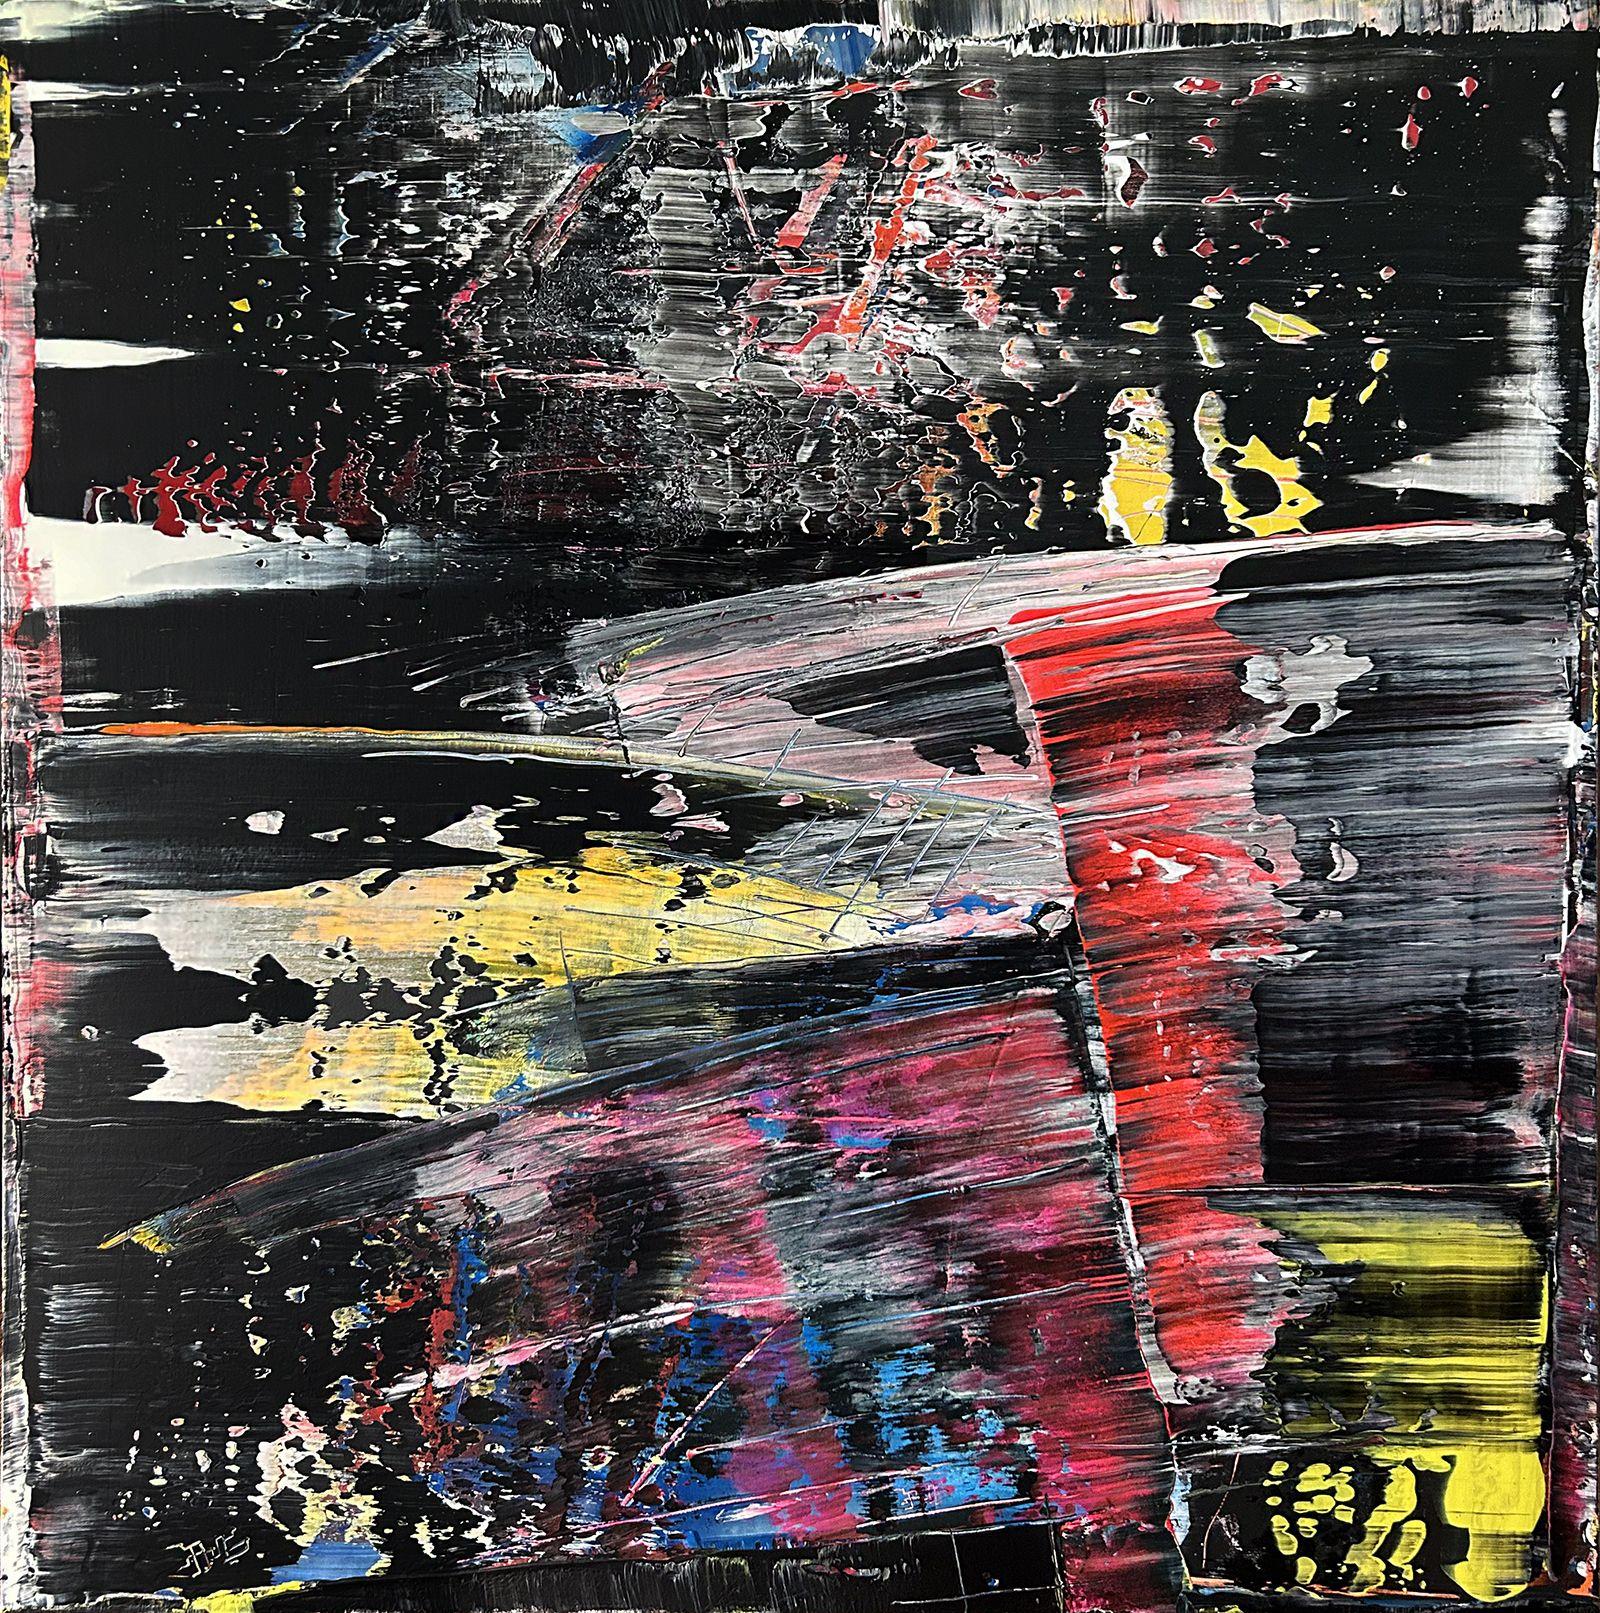 This is a unique large modern PMS abstract acrylic painting that will make a statement in your home or office. This piece has a mature, modern design aesthetic. This piece is fierce and full of energy, darkness and angst. The colors streak and